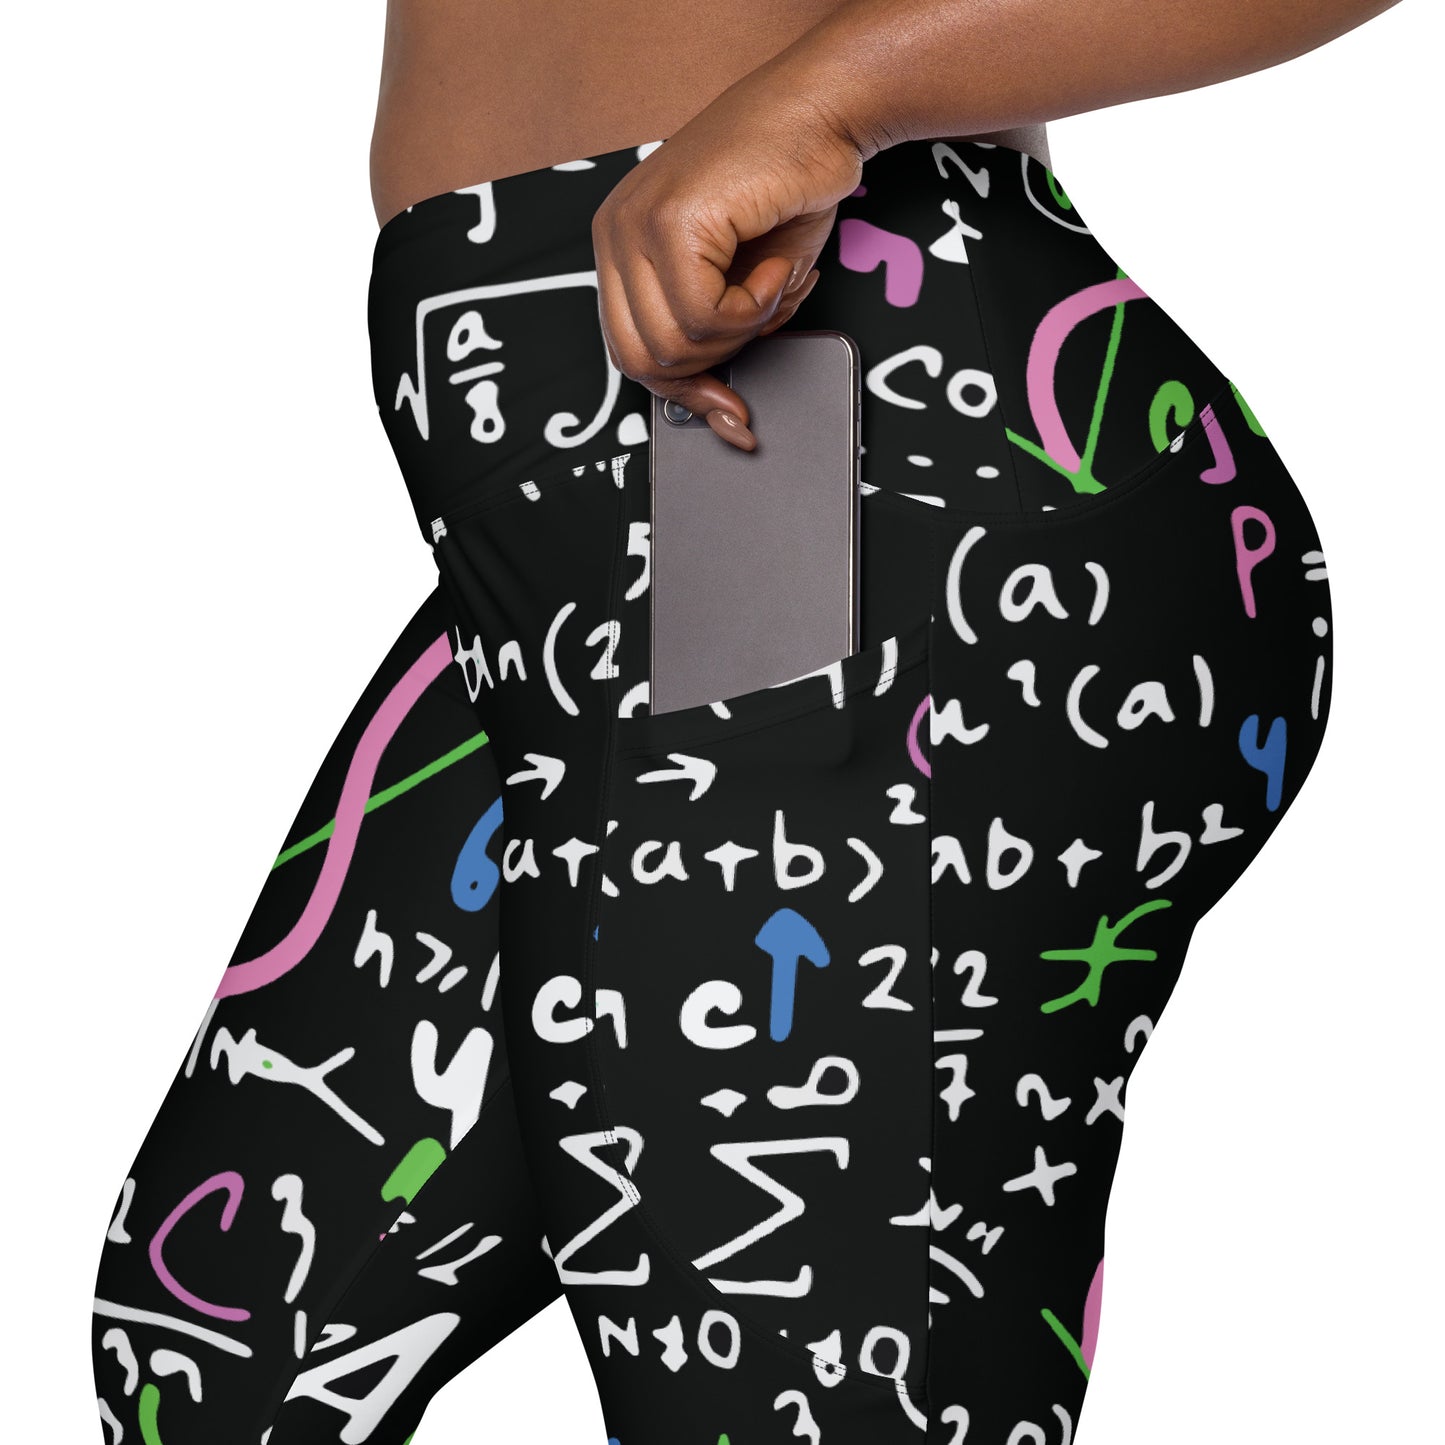 Equations In Pink And Green - Leggings with pockets, 2XS - 6XL Leggings With Pockets 2XS - 6XL (US) Mens Science